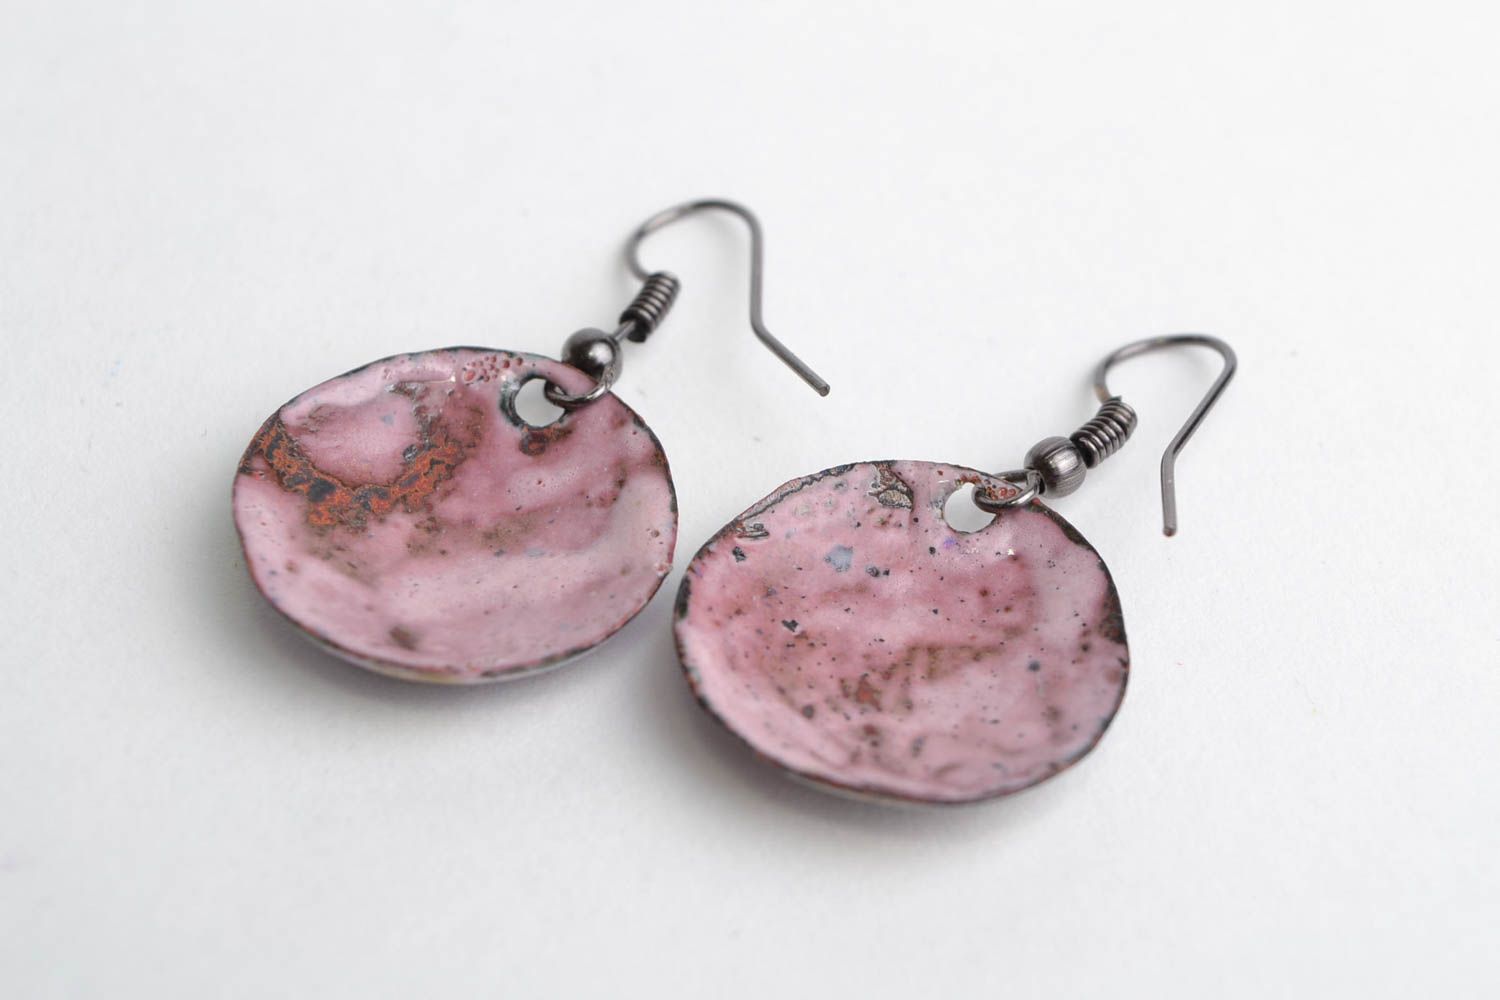 Handmade round violet enameled copper dangling earrings with apples images photo 5